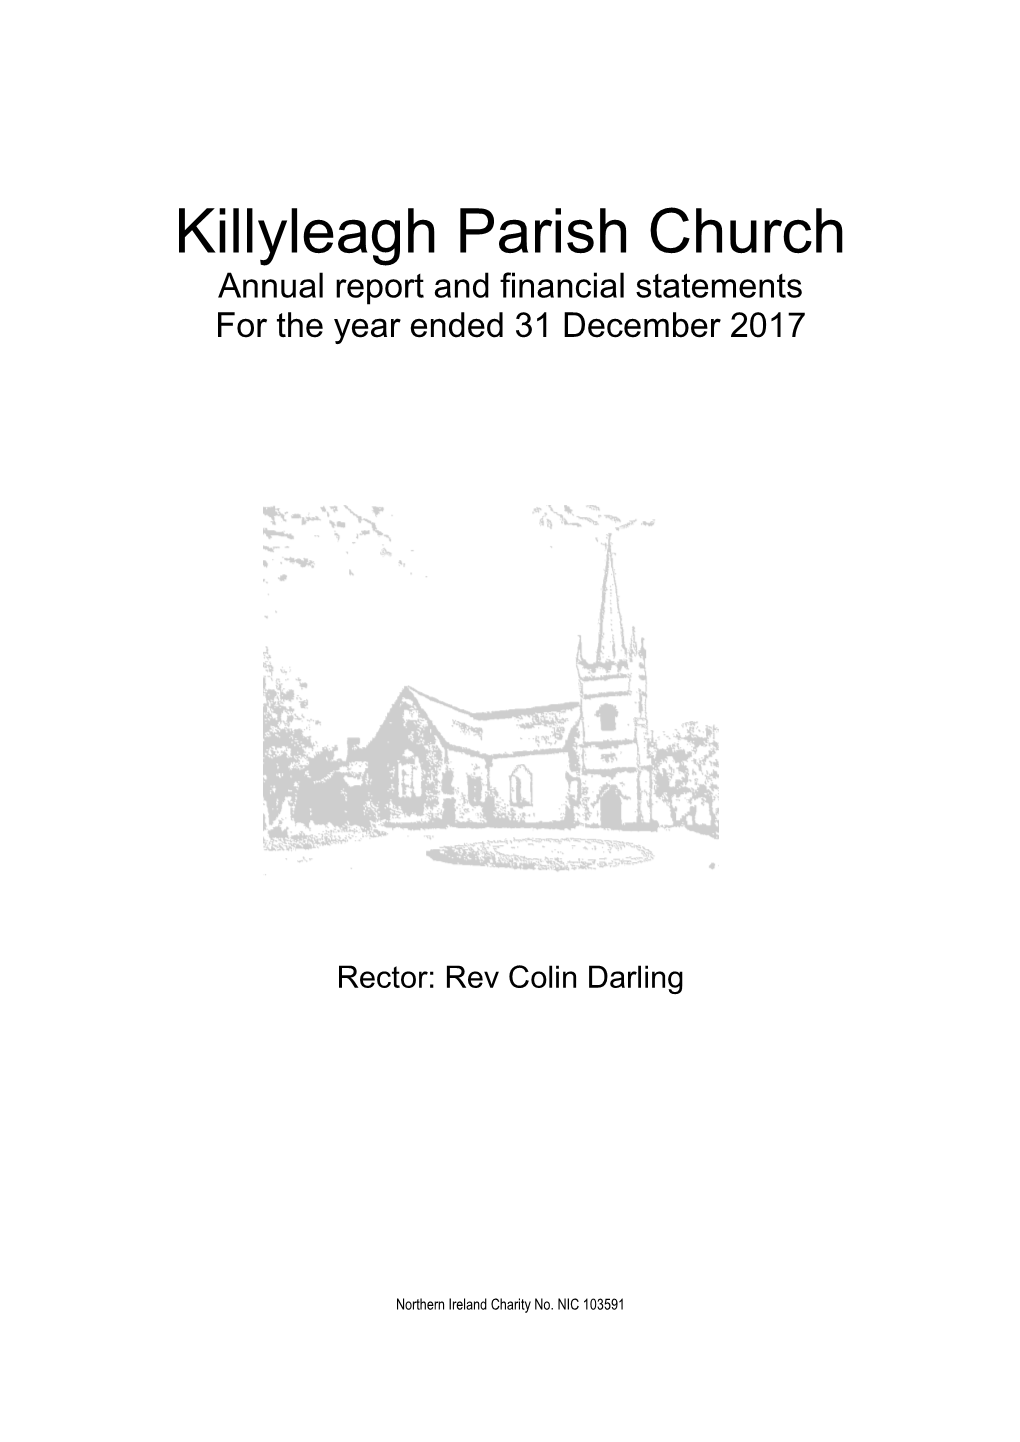 Killyleagh Parish Church Annual Report and Financial Statements for the Year Ended 31 December 2017